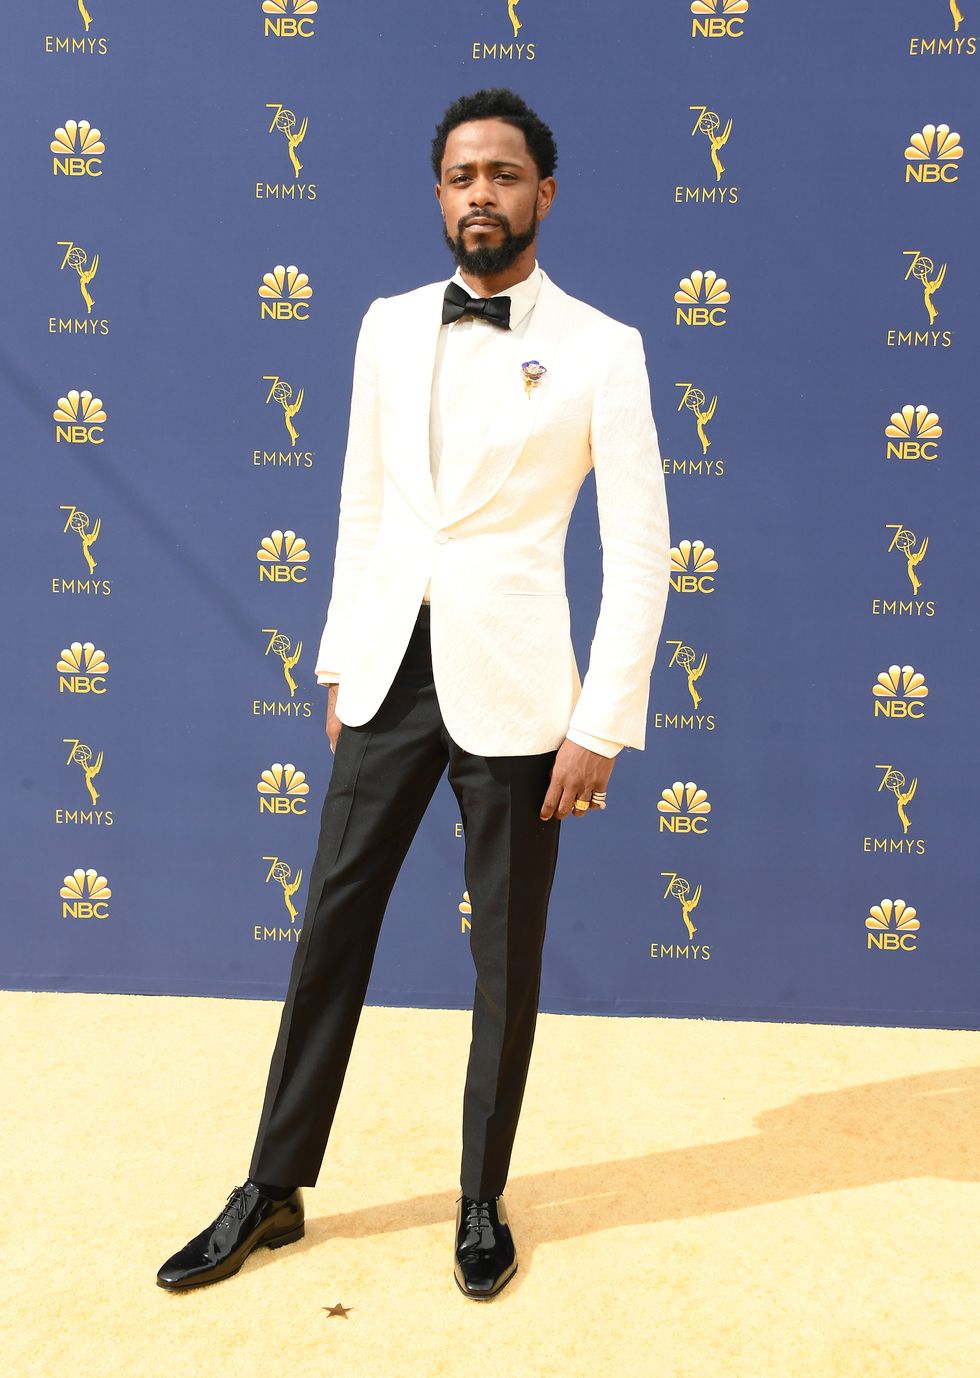 Lakeith Stanfield at the 2018 Emmy Awards